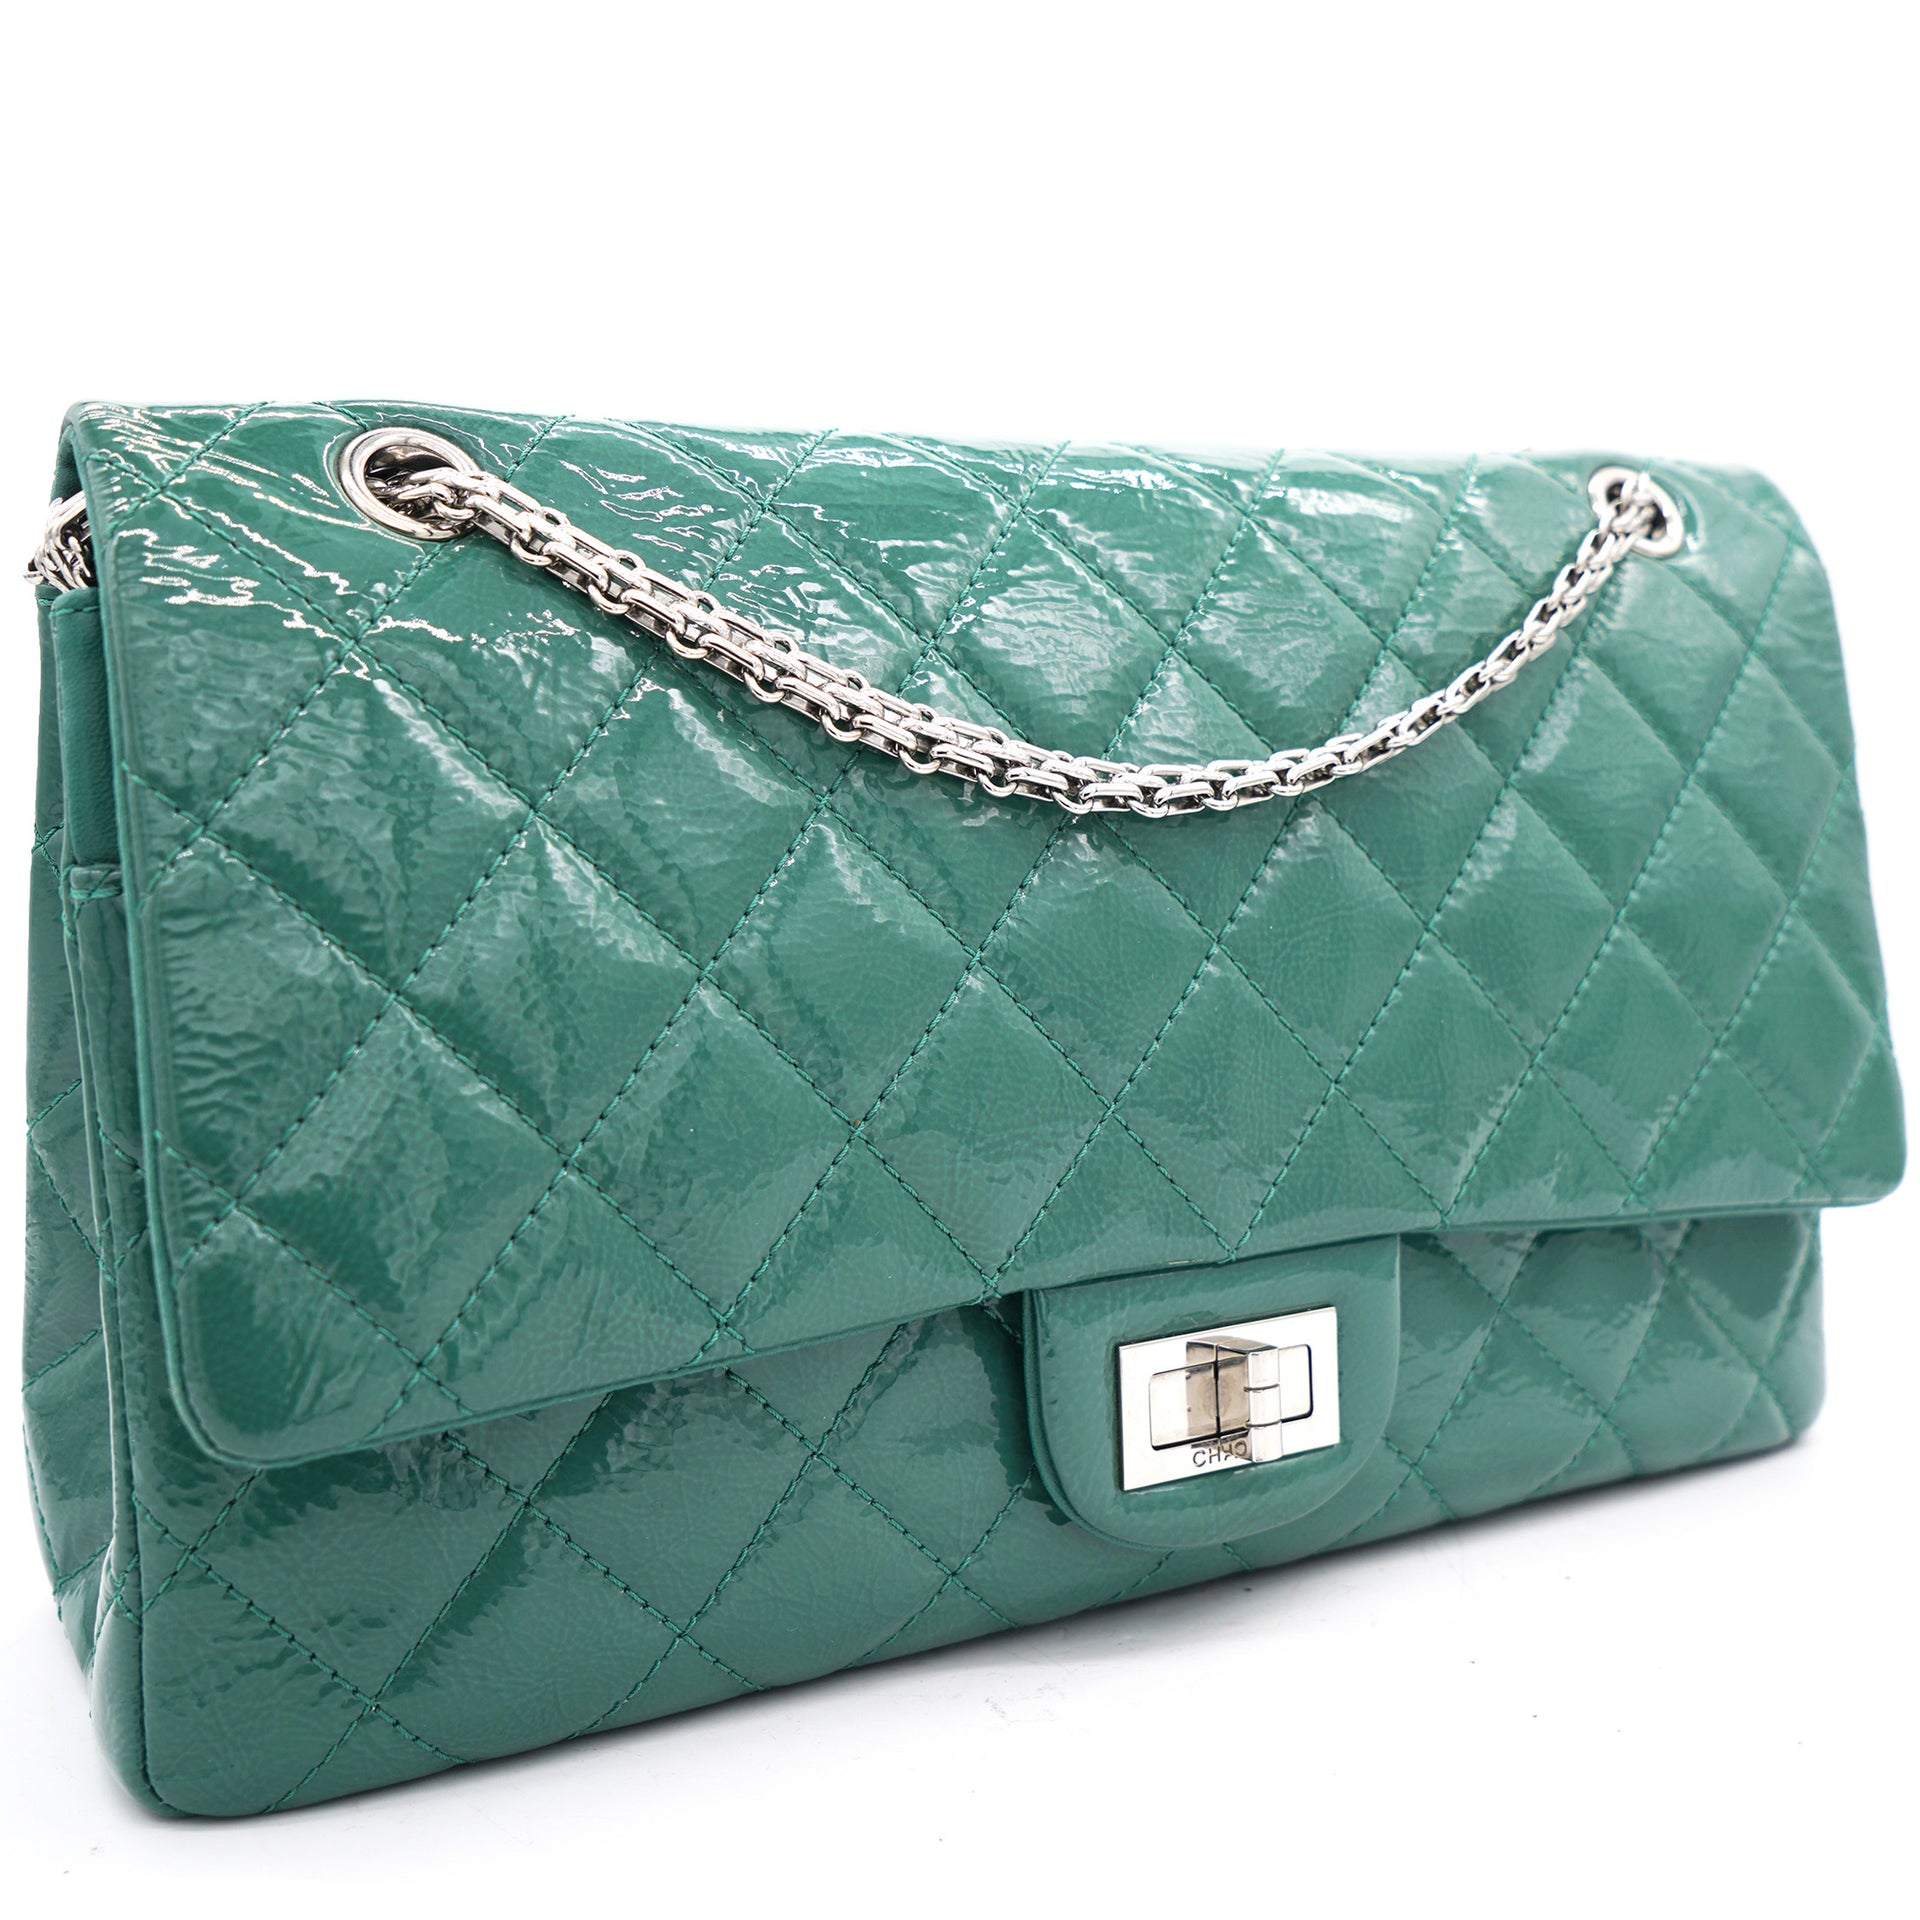 Green Quilted Patent Leather Reissue 2.55 Classic 227 Flap Bag – STYLISHTOP